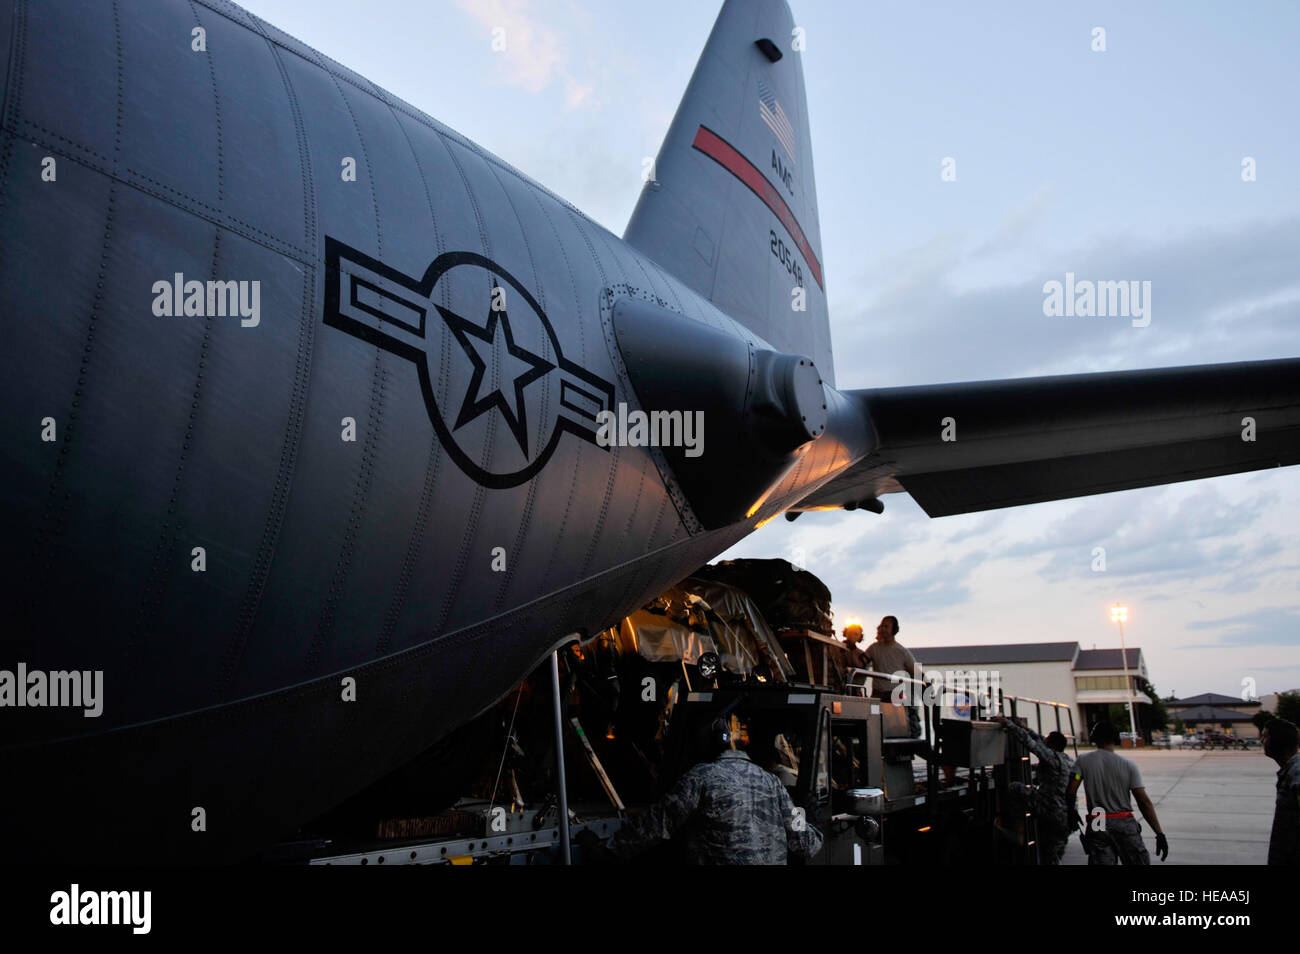 A U.S. Air Force C-130H Hercules aircrew from the 30th Airlift Squadron and Airmen from the 3rd Aerial Port Squadron load heavy equipment onto the aircraft before a mission in support of Joint Operations Access Exercise on Fort Bragg, N.C., June 7, 2012.  A joint operations access exercise is a two-week exercise to prepare Air Force and Army service members to respond to worldwide crises and contingencies.   Staff Sgt. Eric Harris Stock Photo